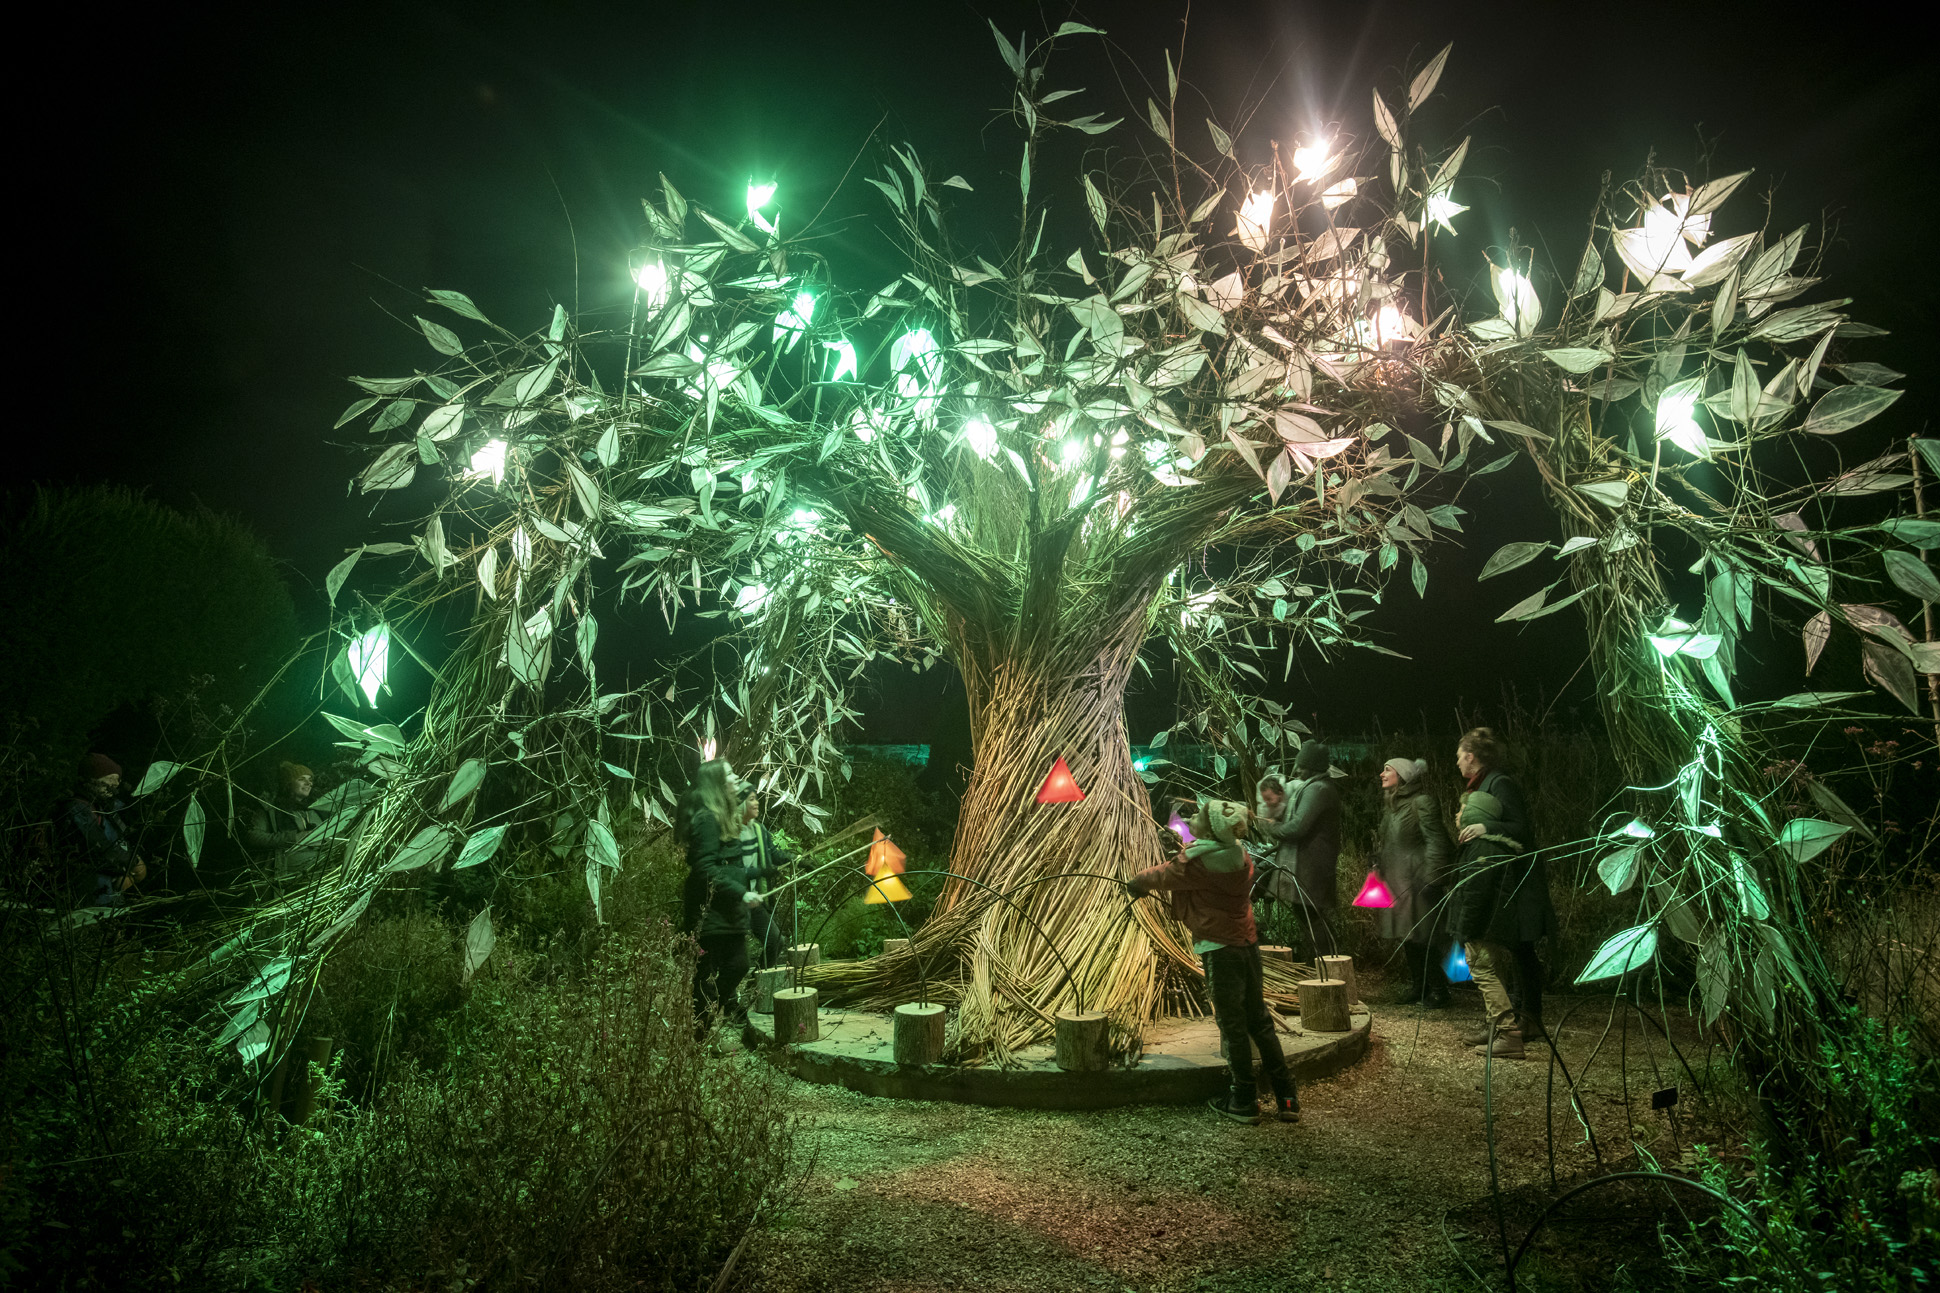 Majestic tree made of willow with illuminated leaf lanterns